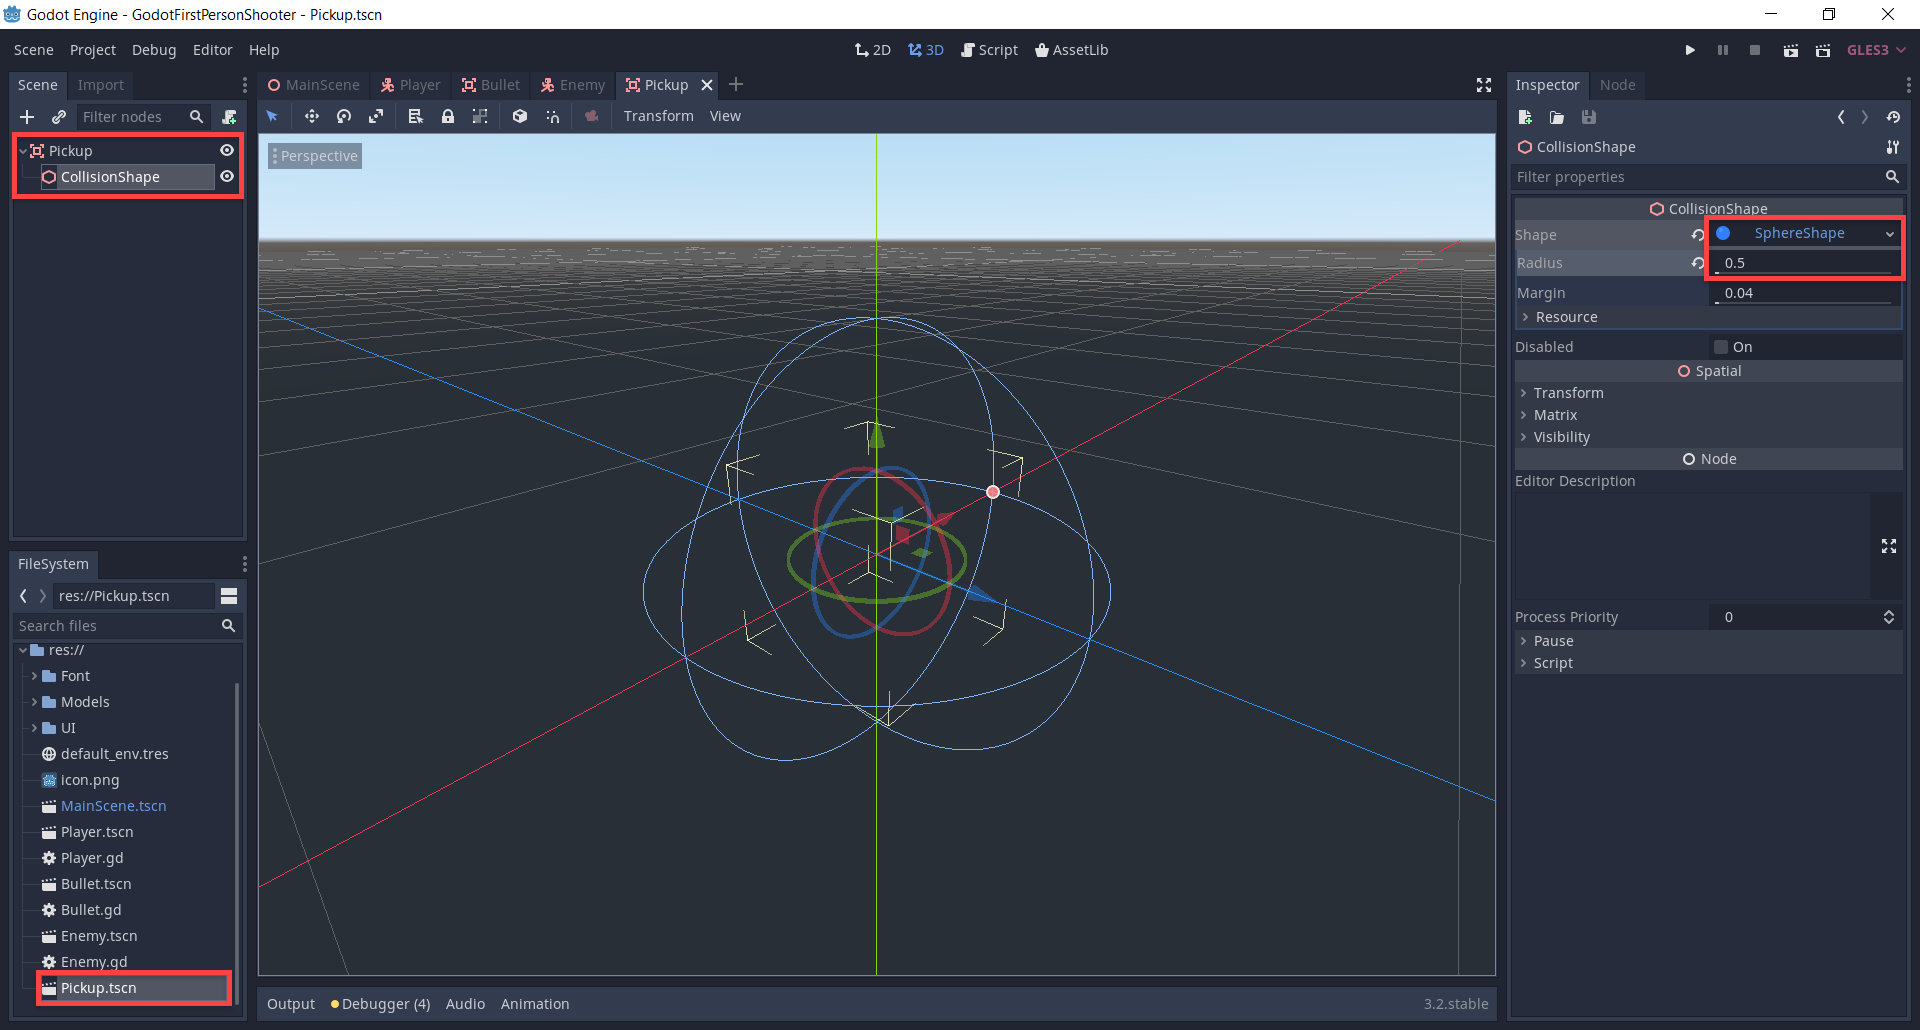 Pickup Node in Godot with CollisionShape